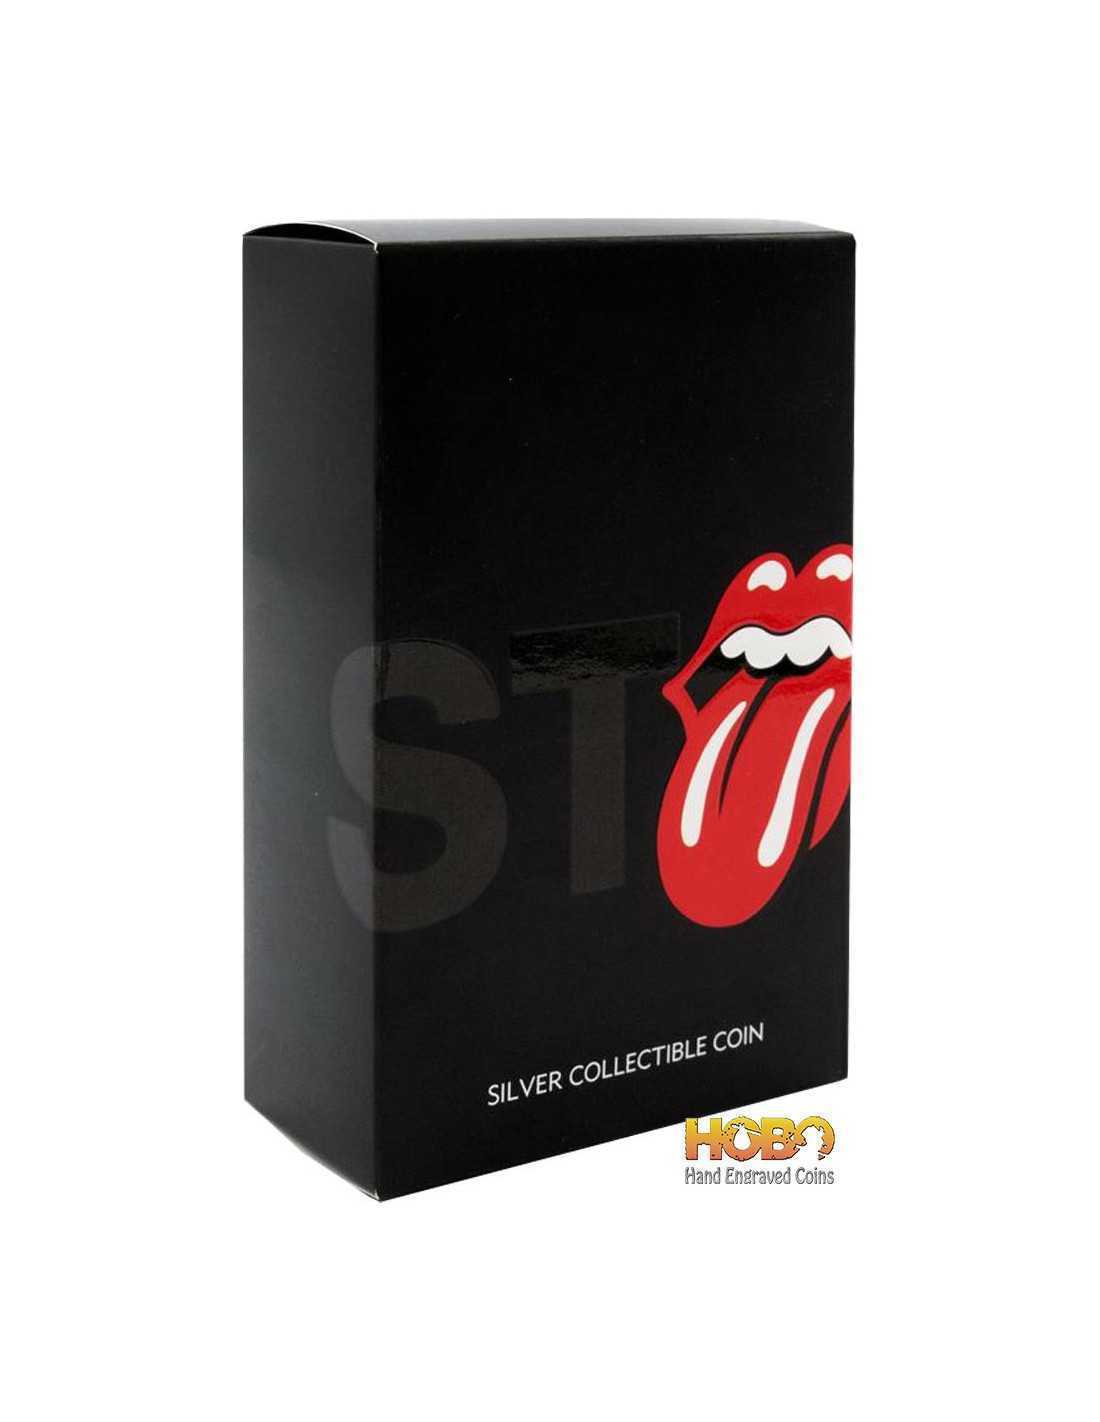 ROLLING STONES Tongue and Lips Silver Coin 1 Pound Gibraltar 2021